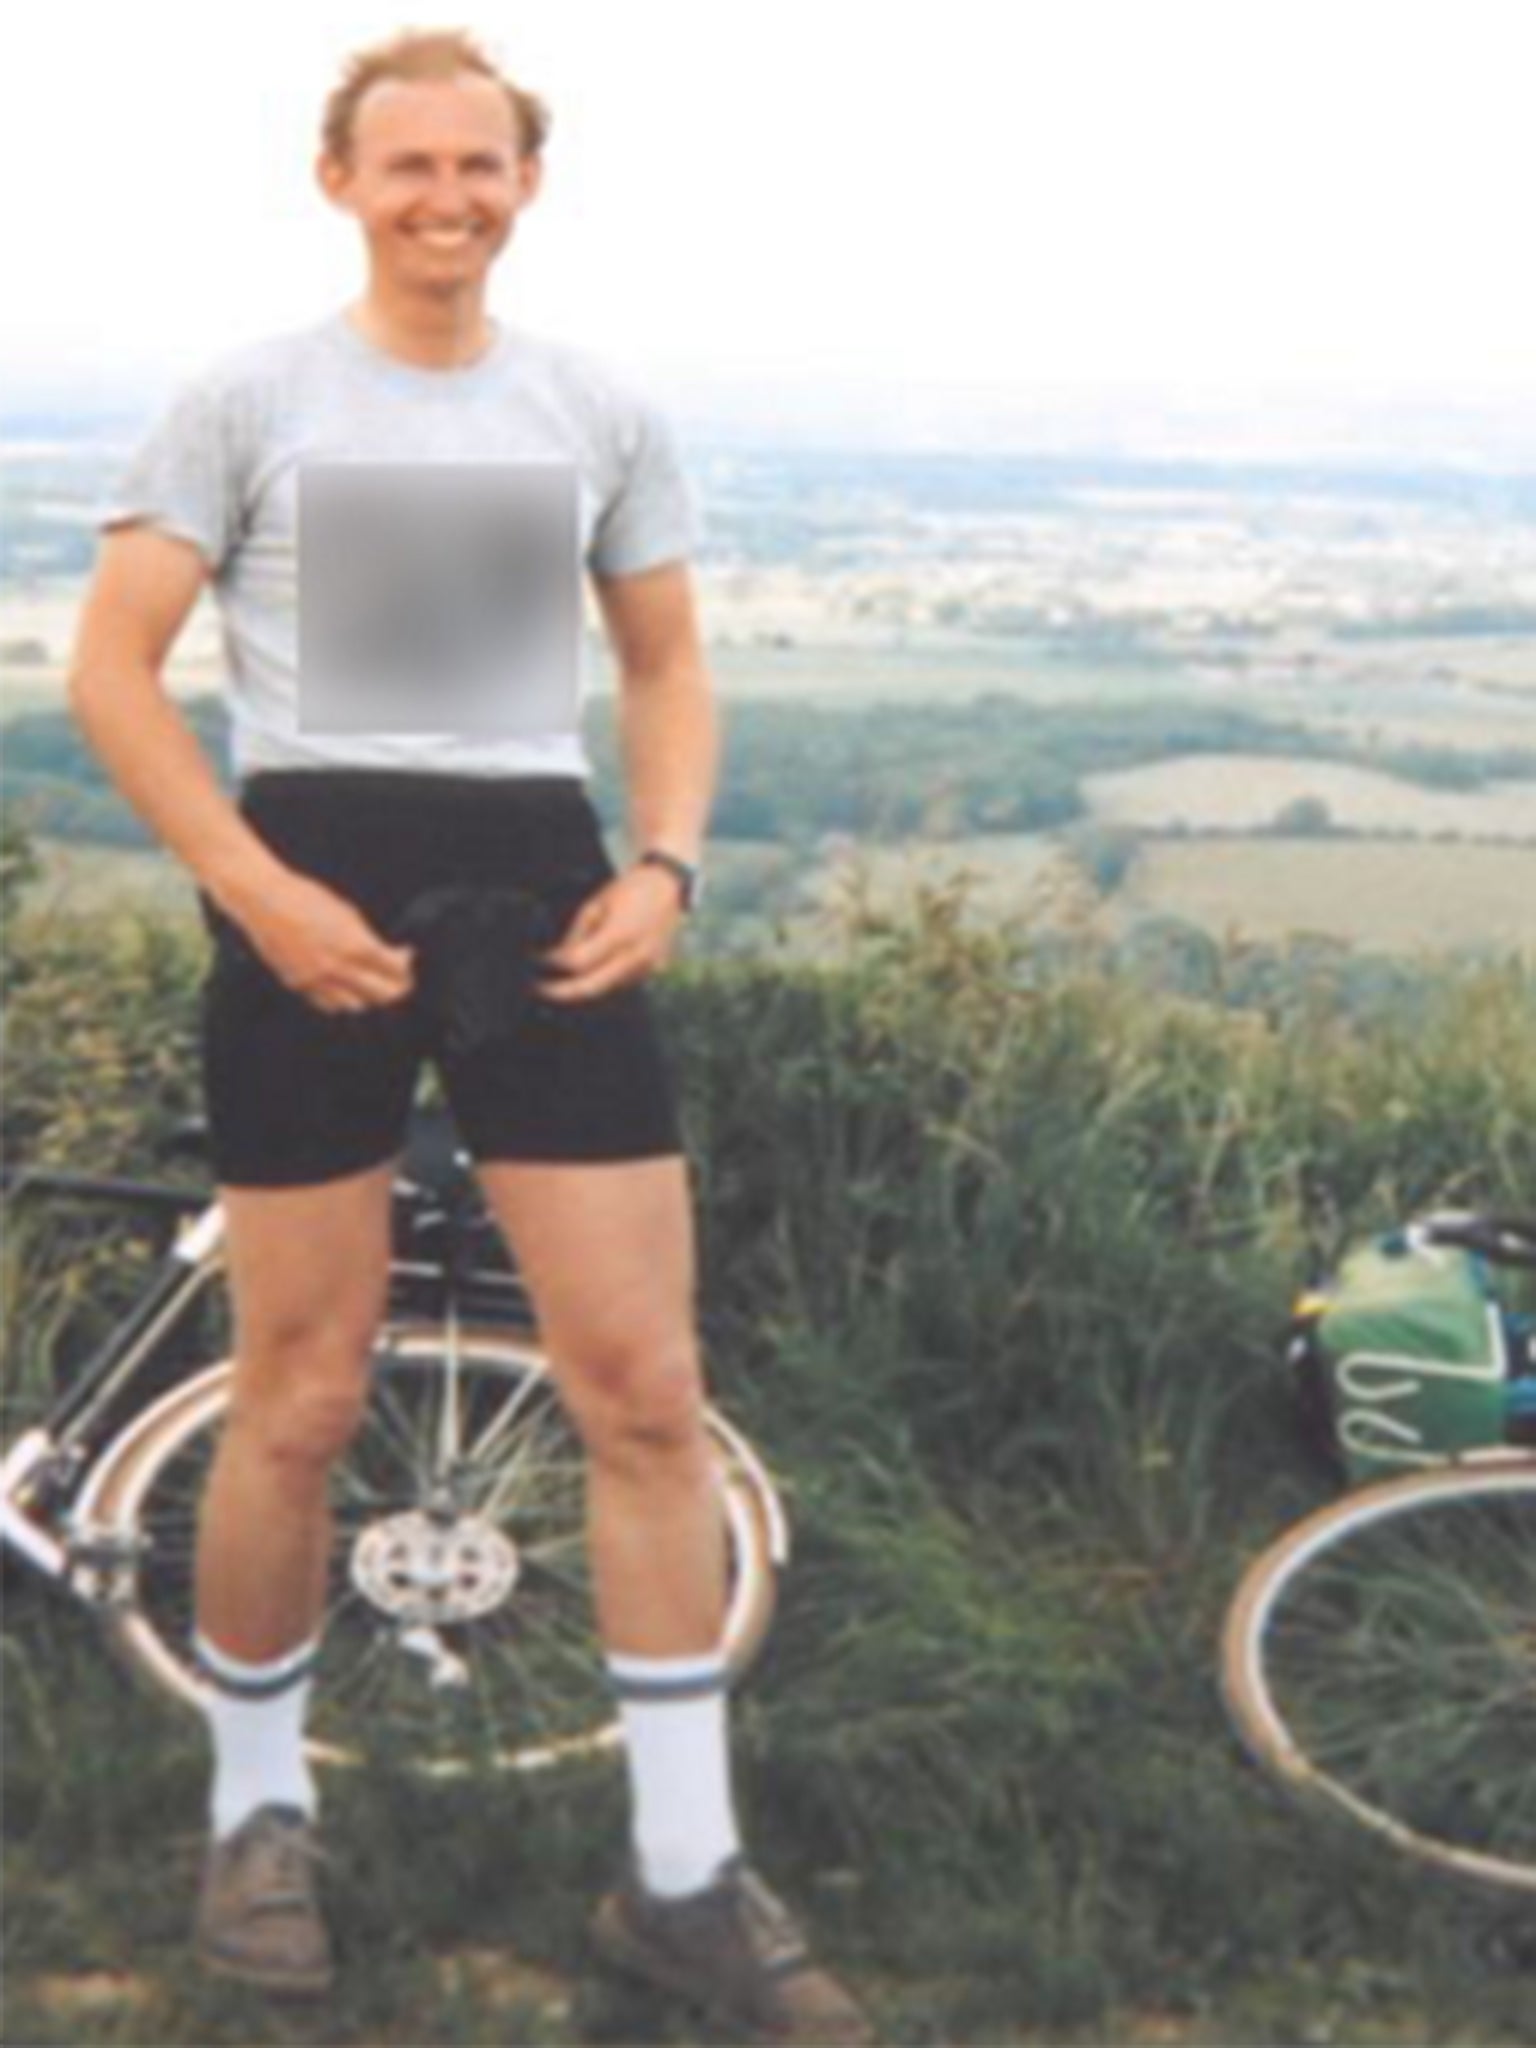 Fuller on a cycling trip in the 1980s